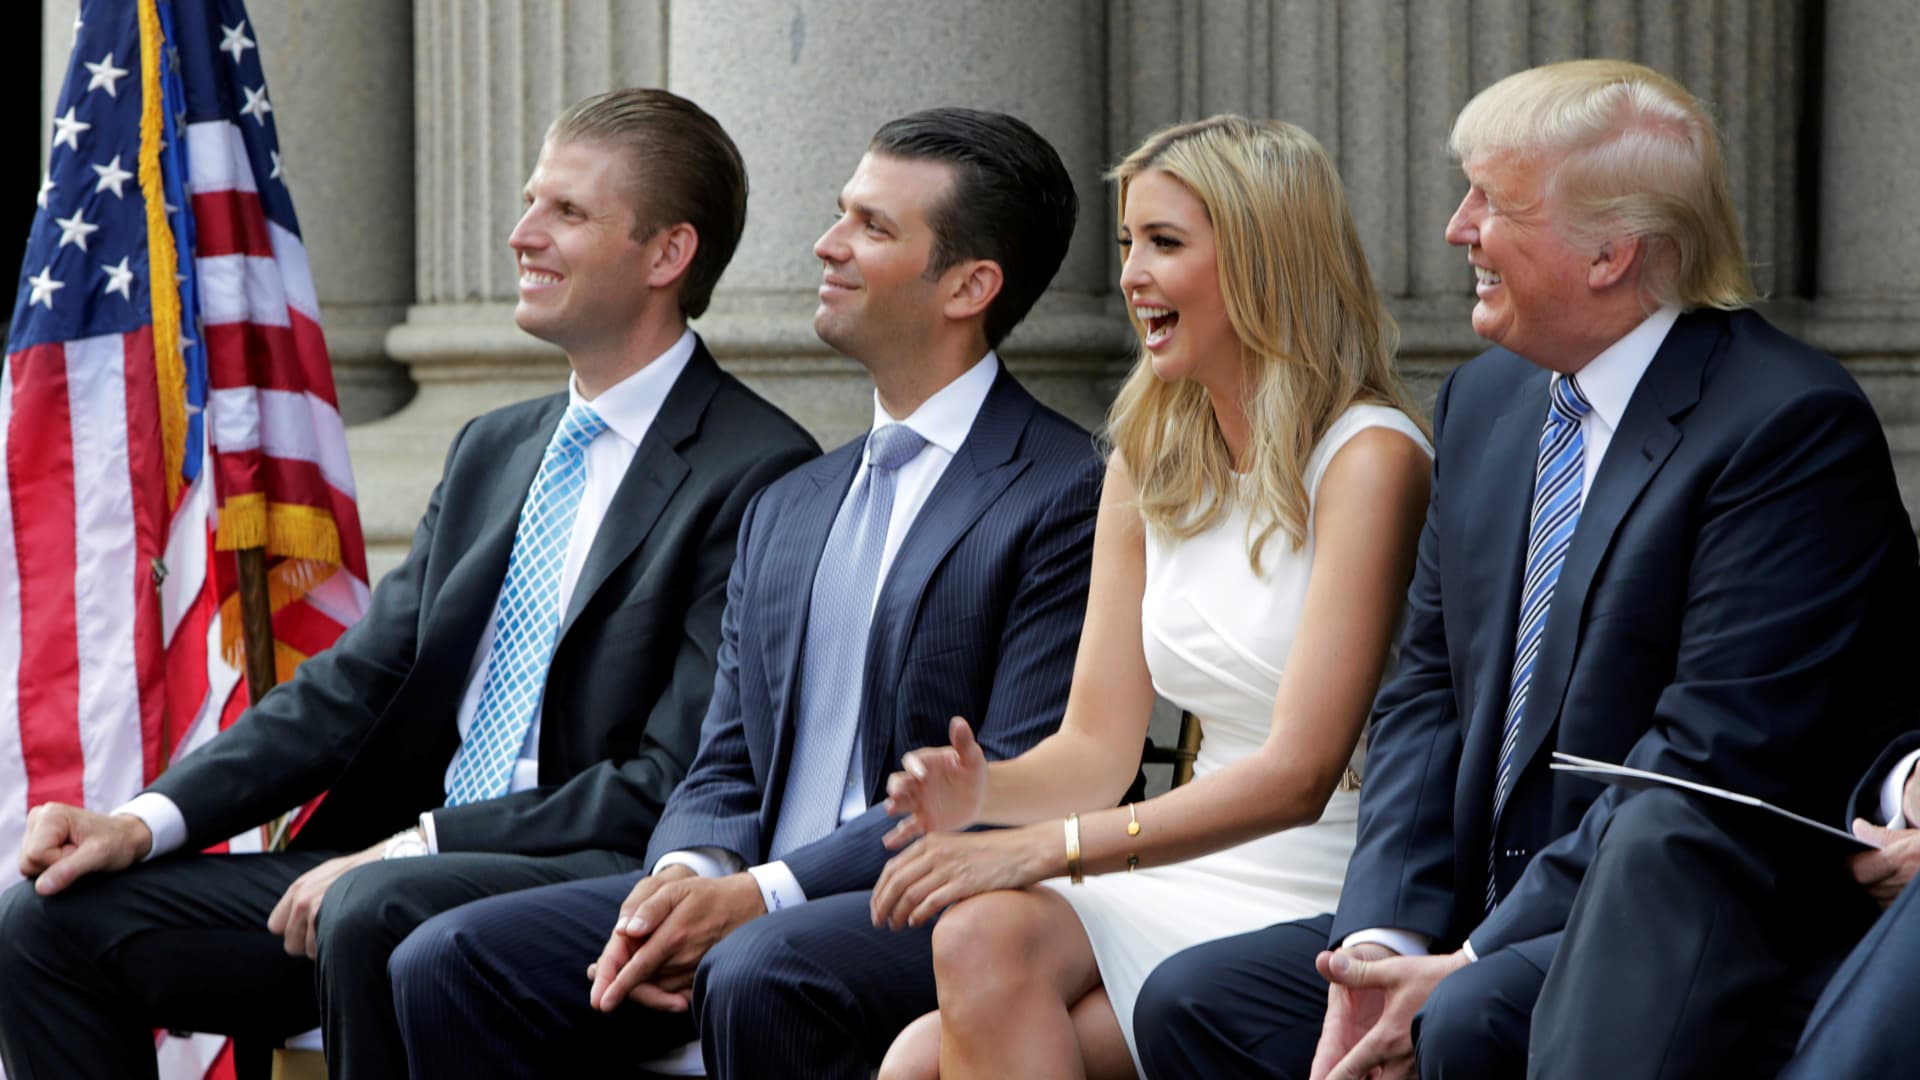 (L-R) Eric Trump, Donald Trump Jr., and Ivanka Trump and Donald Trump attend the ground breaking of the Trump International Hotel at the Old Post Office Building in Washington July 23, 2014.